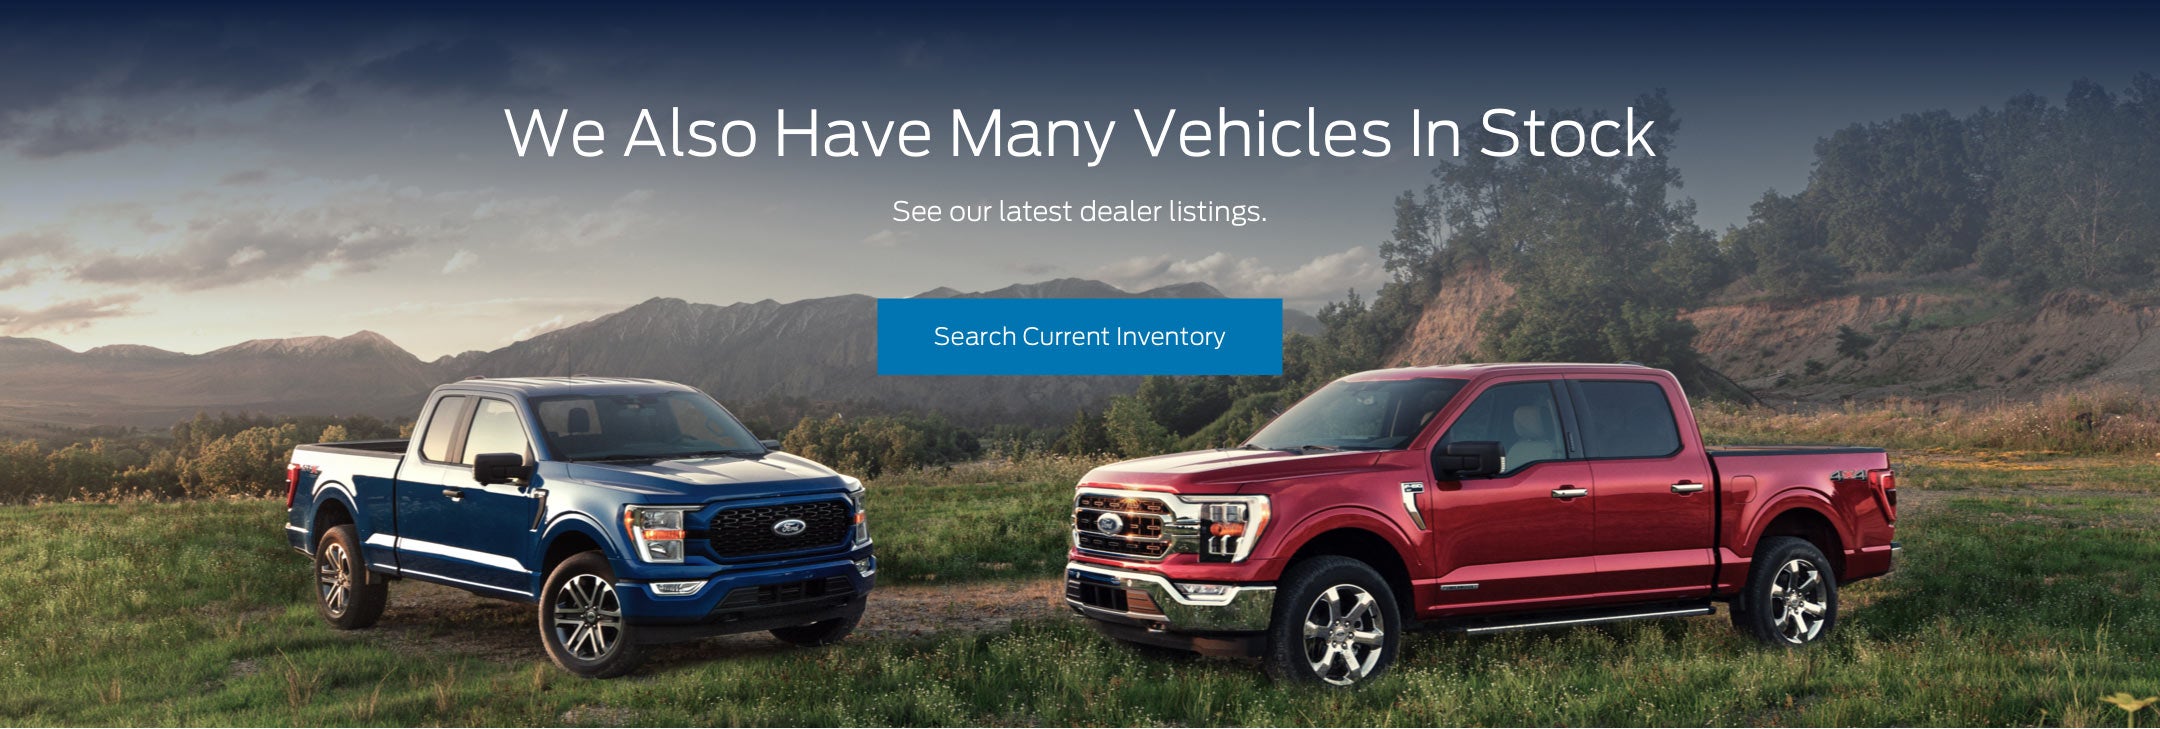 Ford vehicles in stock | Pennyrile Ford in Hopkinsville KY